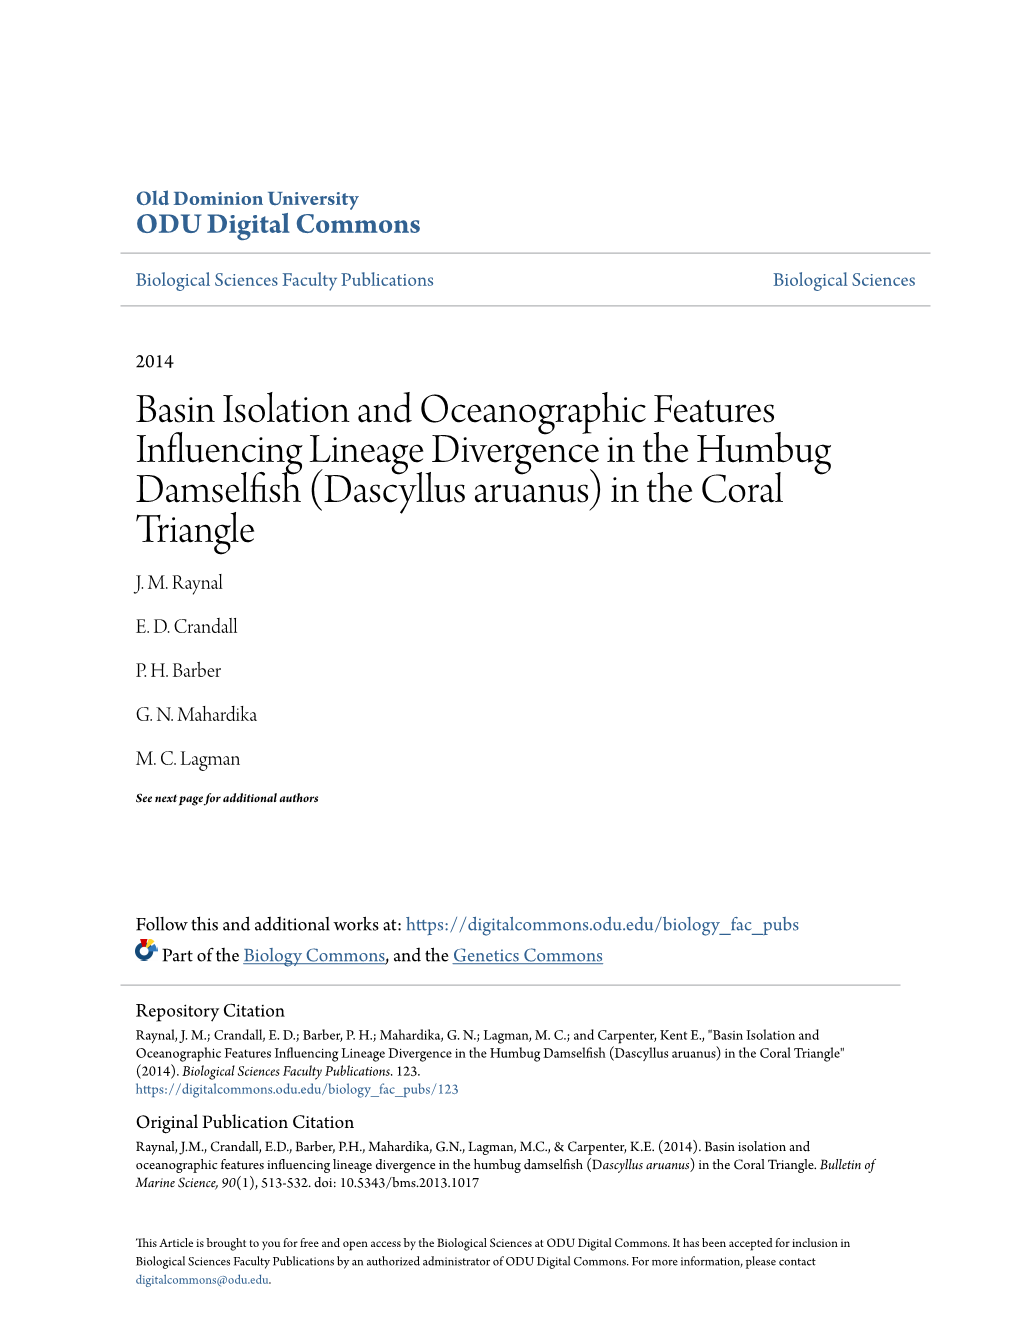 Basin Isolation and Oceanographic Features Influencing Lineage Divergence in the Humbug Damselfish (Dascyllus Aruanus) in the Coral Triangle J